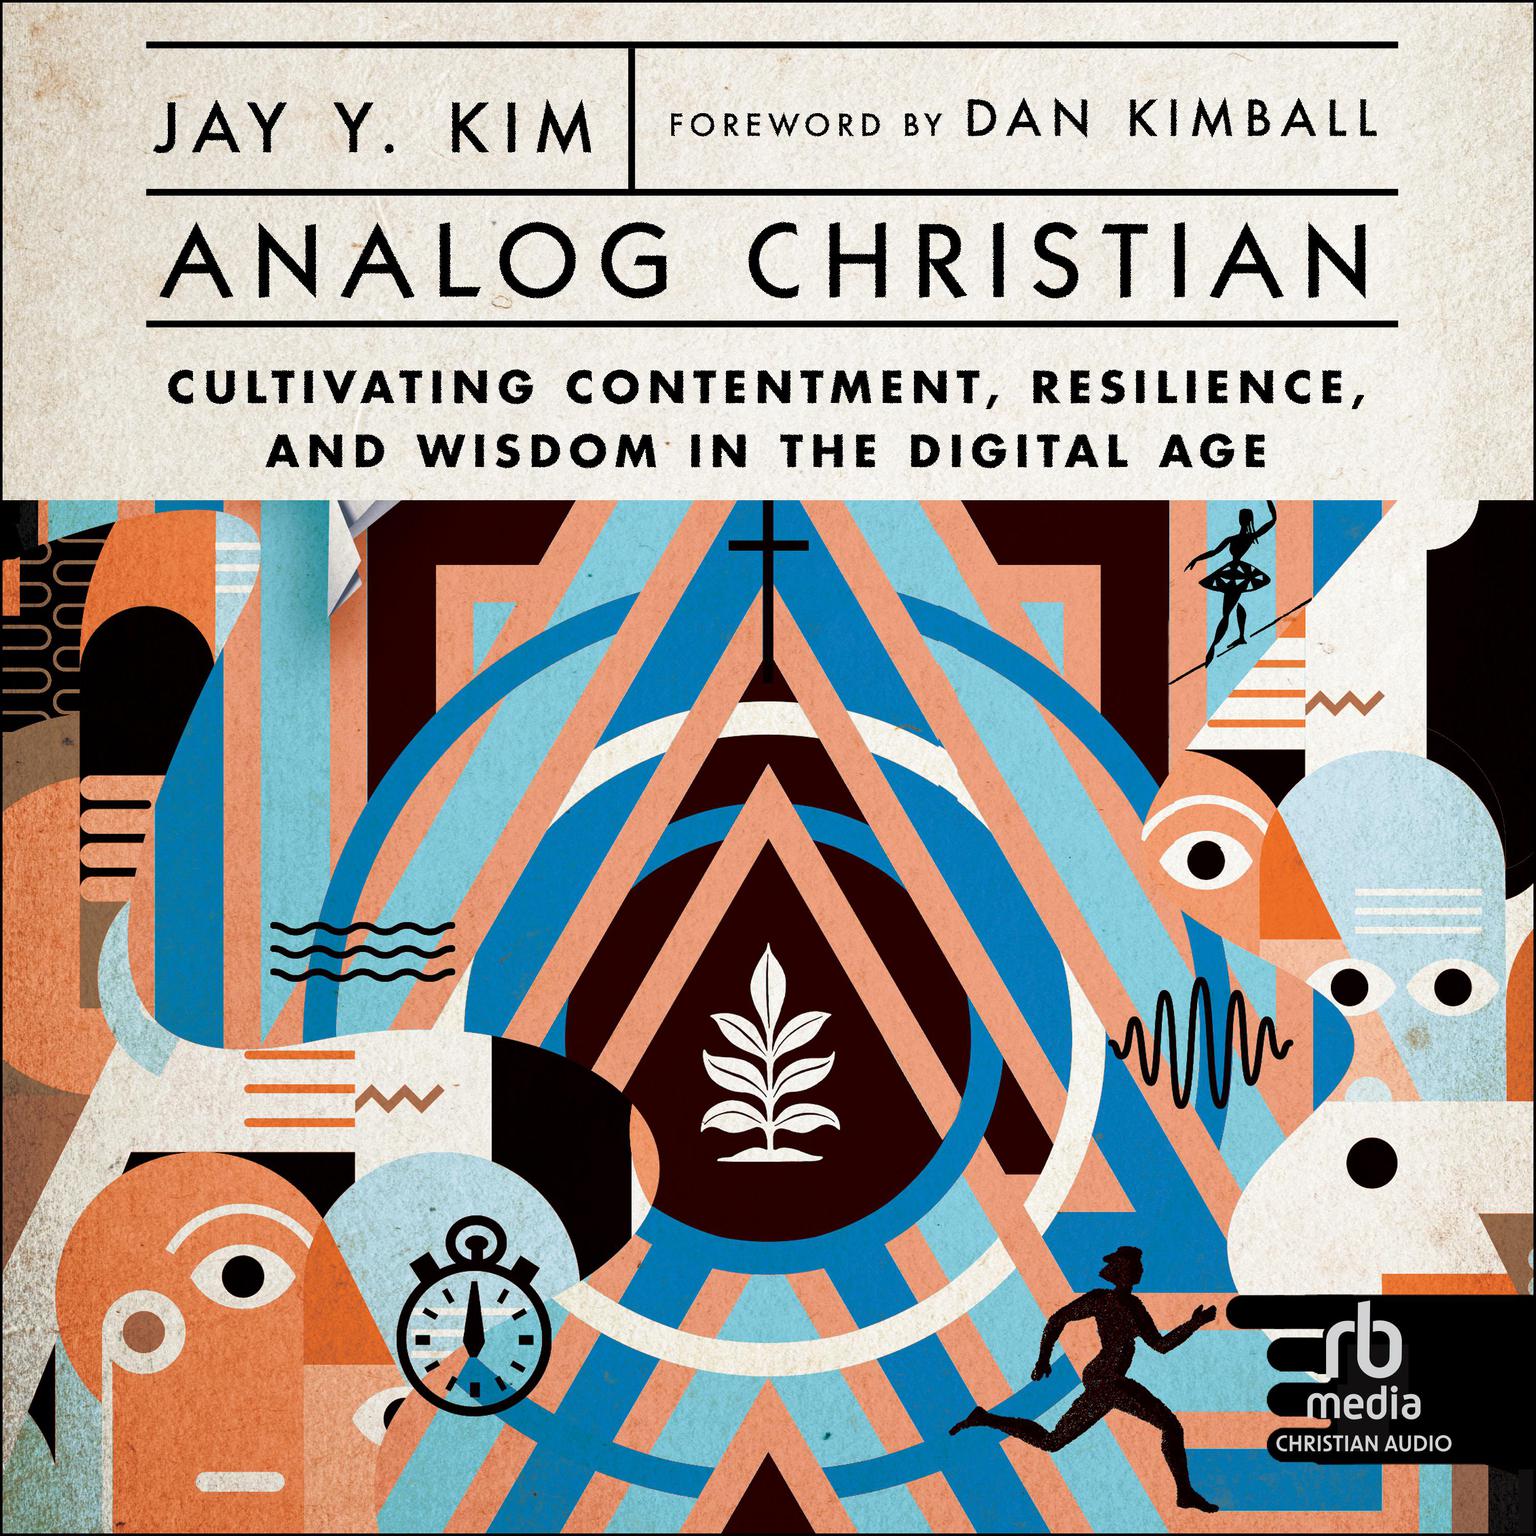 Analog Christian: Cultivating Contentment, Resilience, and Wisdom in the Digital Age Audiobook, by Jay Y. Kim